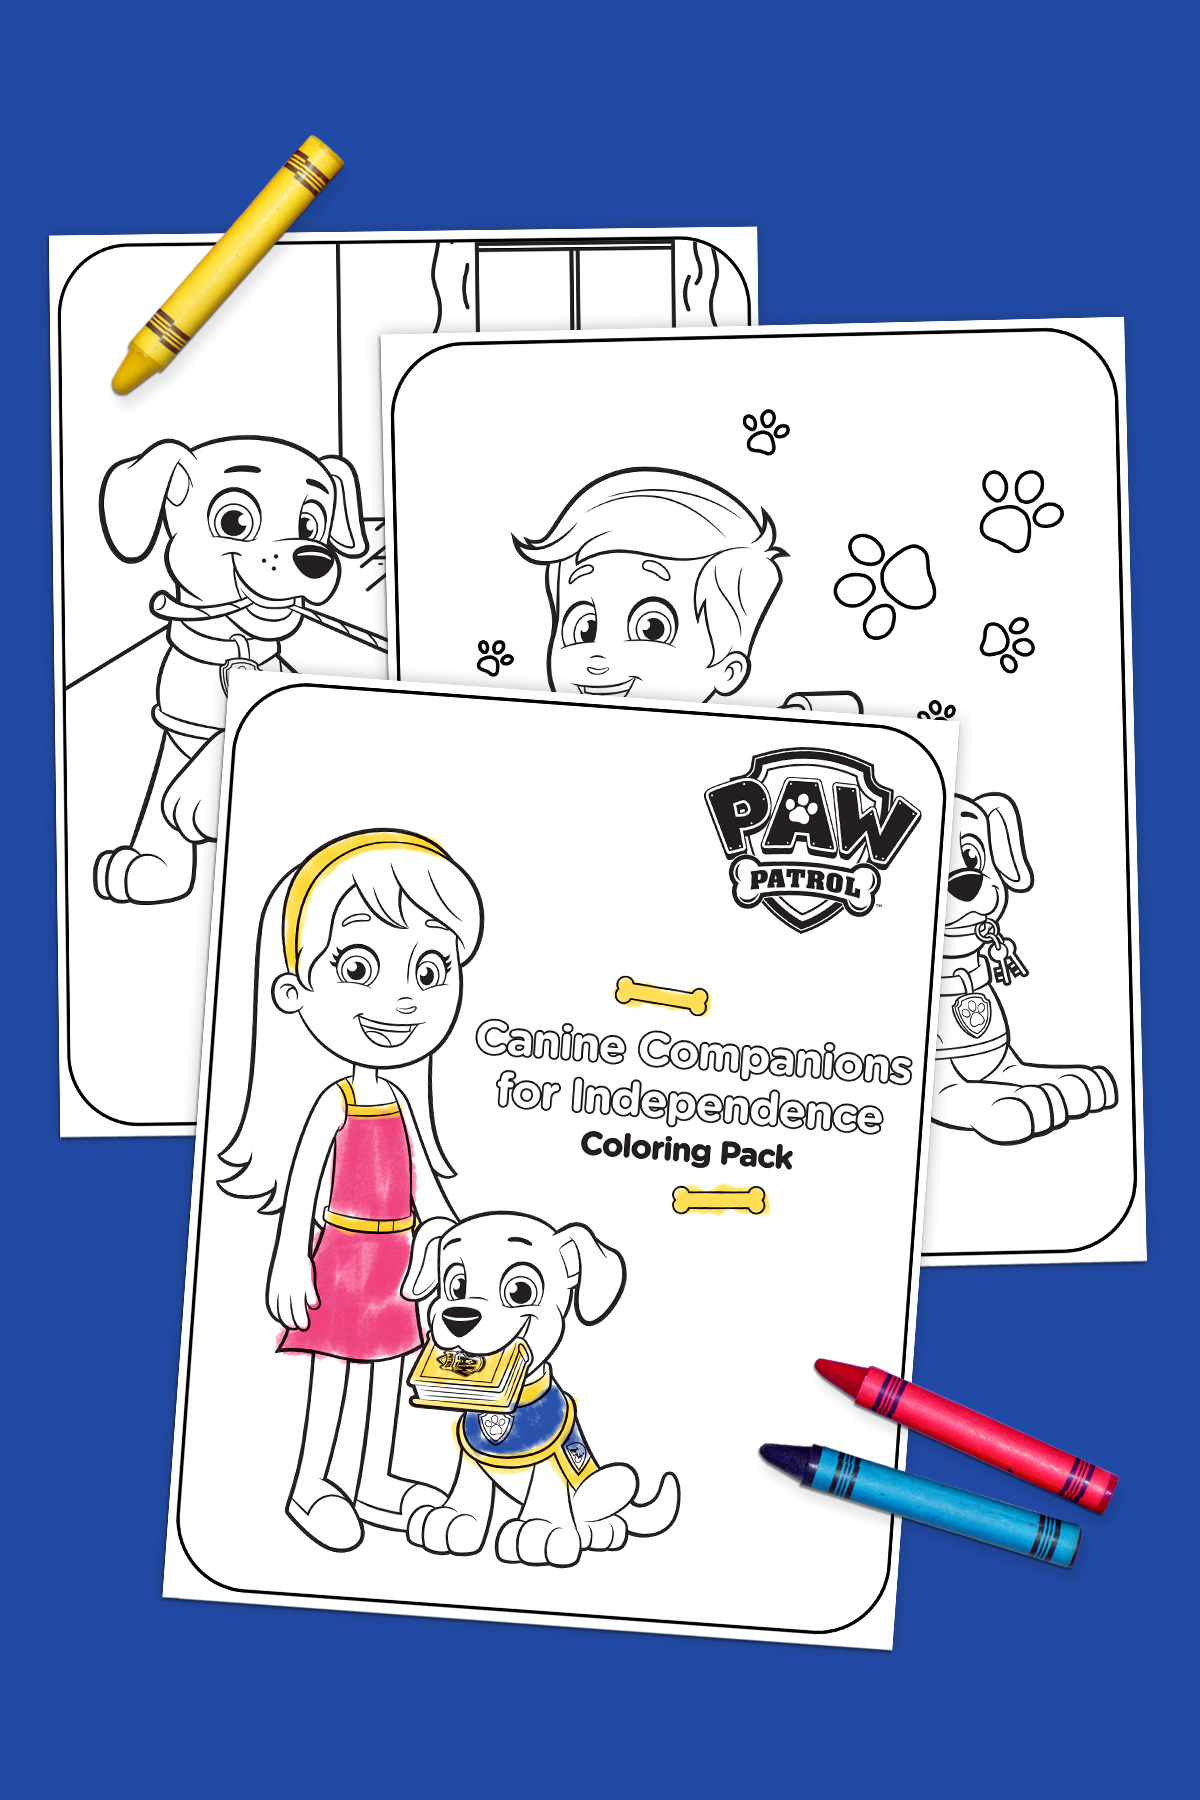 Canine Companions for Independence Coloring Pack